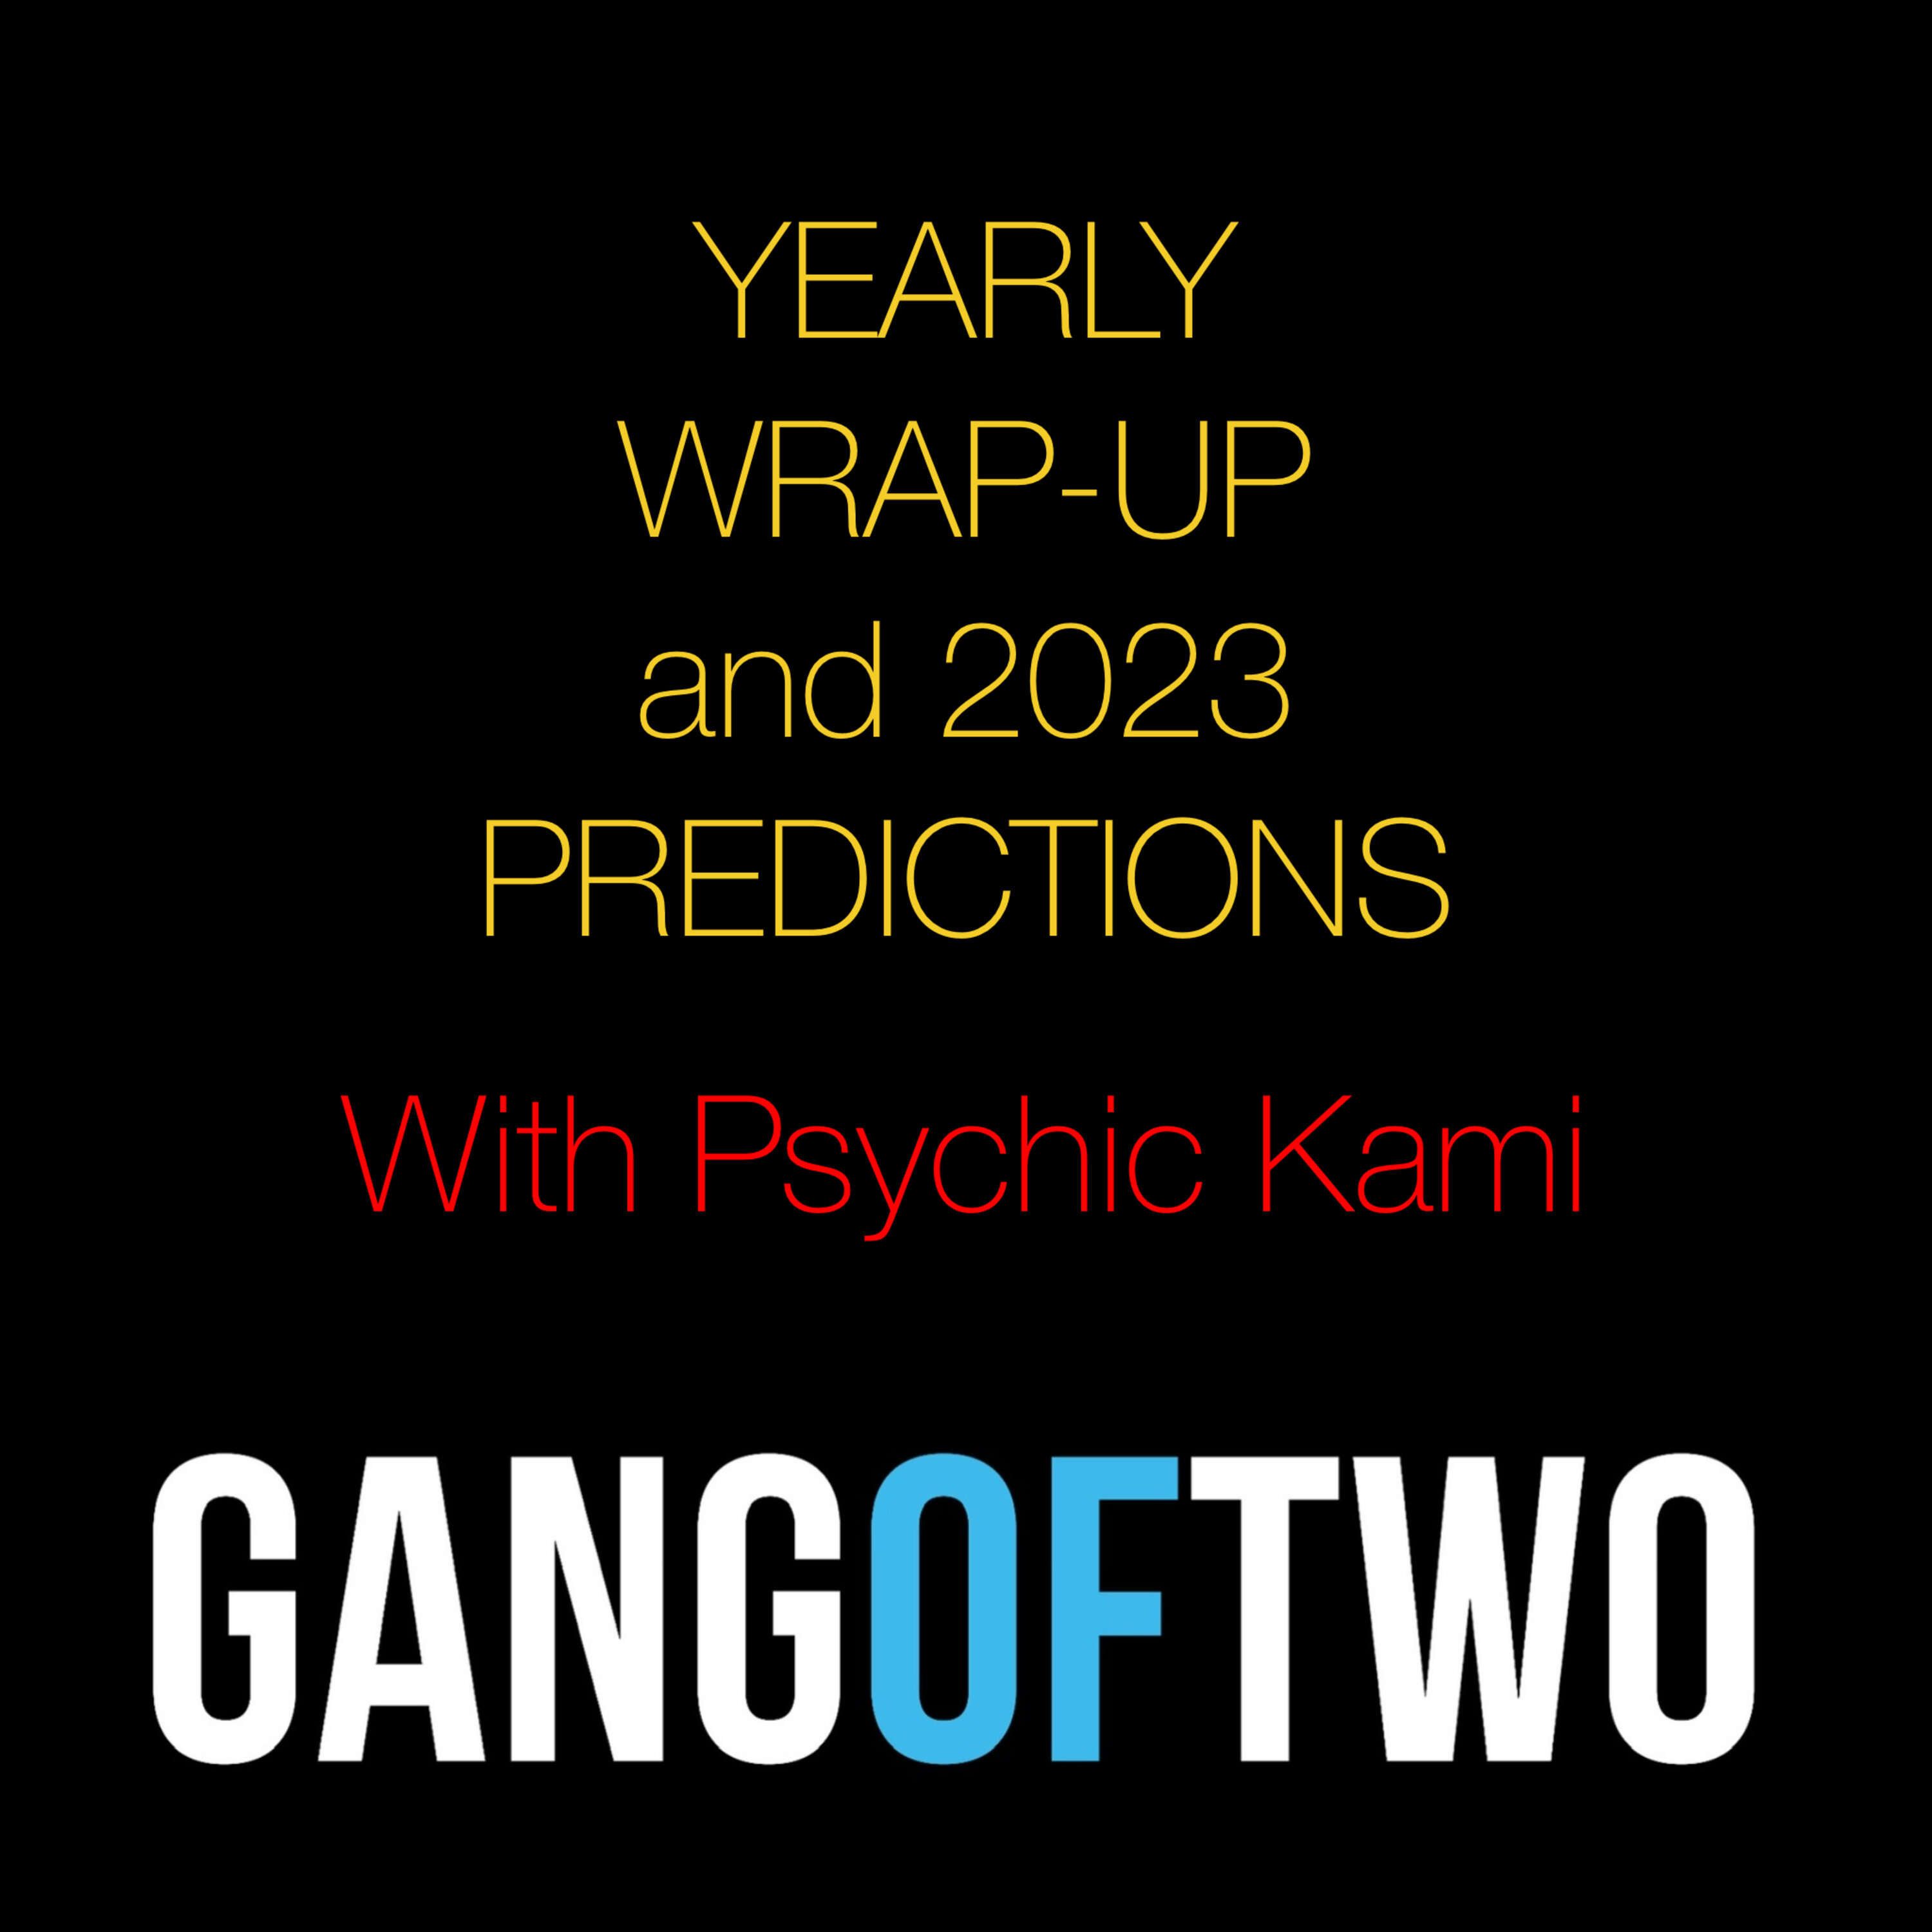 YEARLY WRAP-UP AND 2023 PREDICTIONS WITH PSYCHIC KAMI